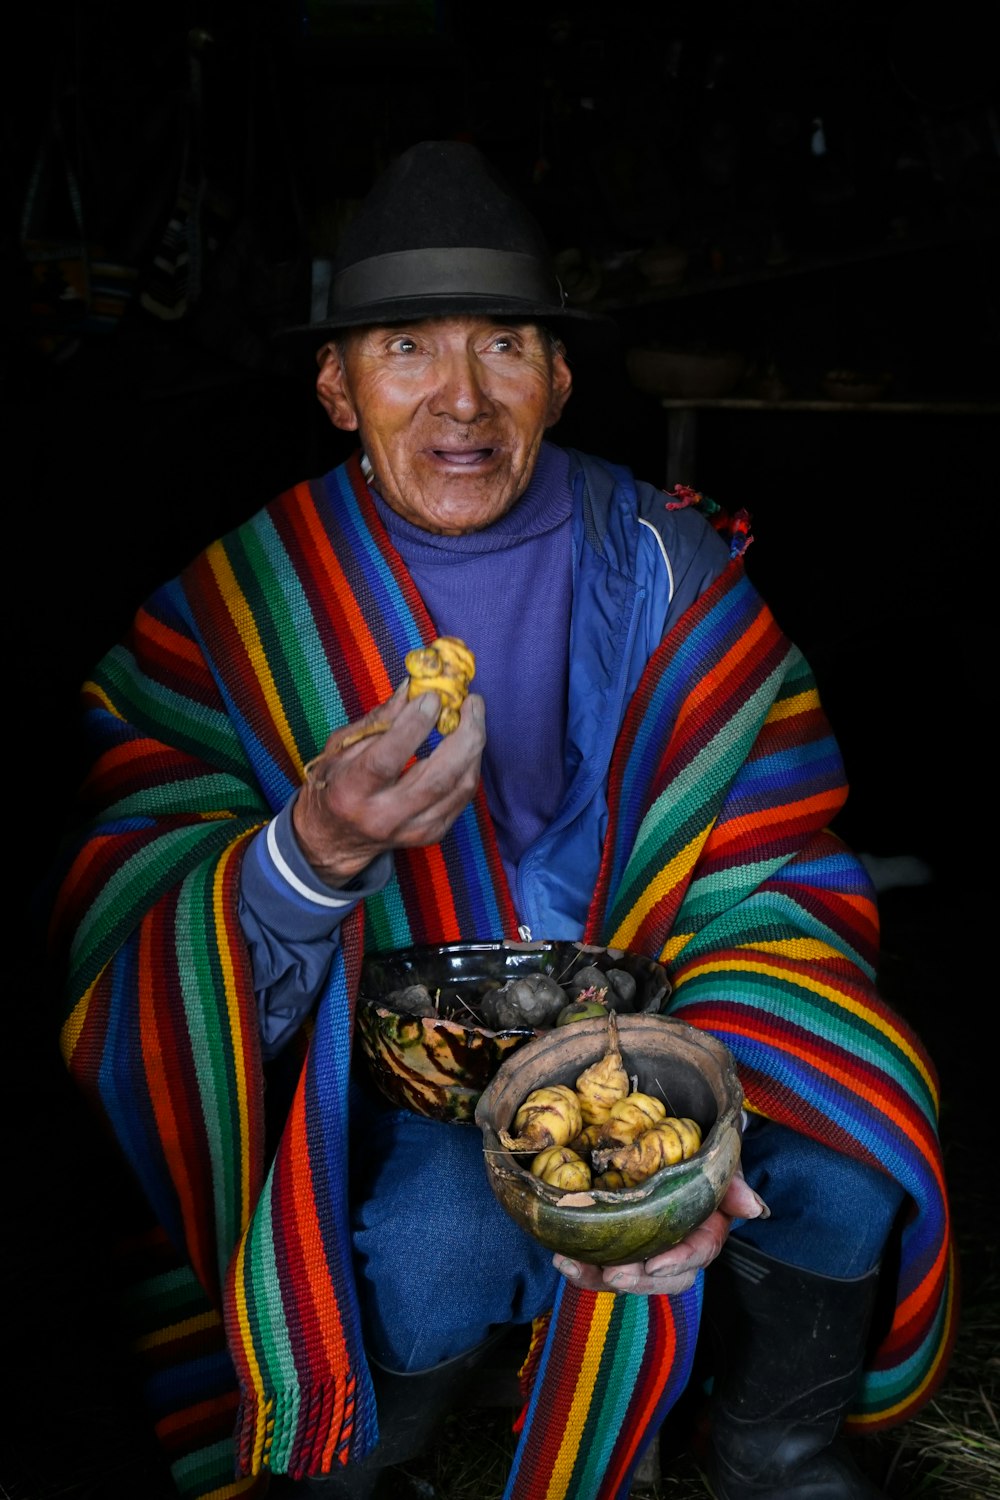 a man in a colorful blanket holding a bowl of food